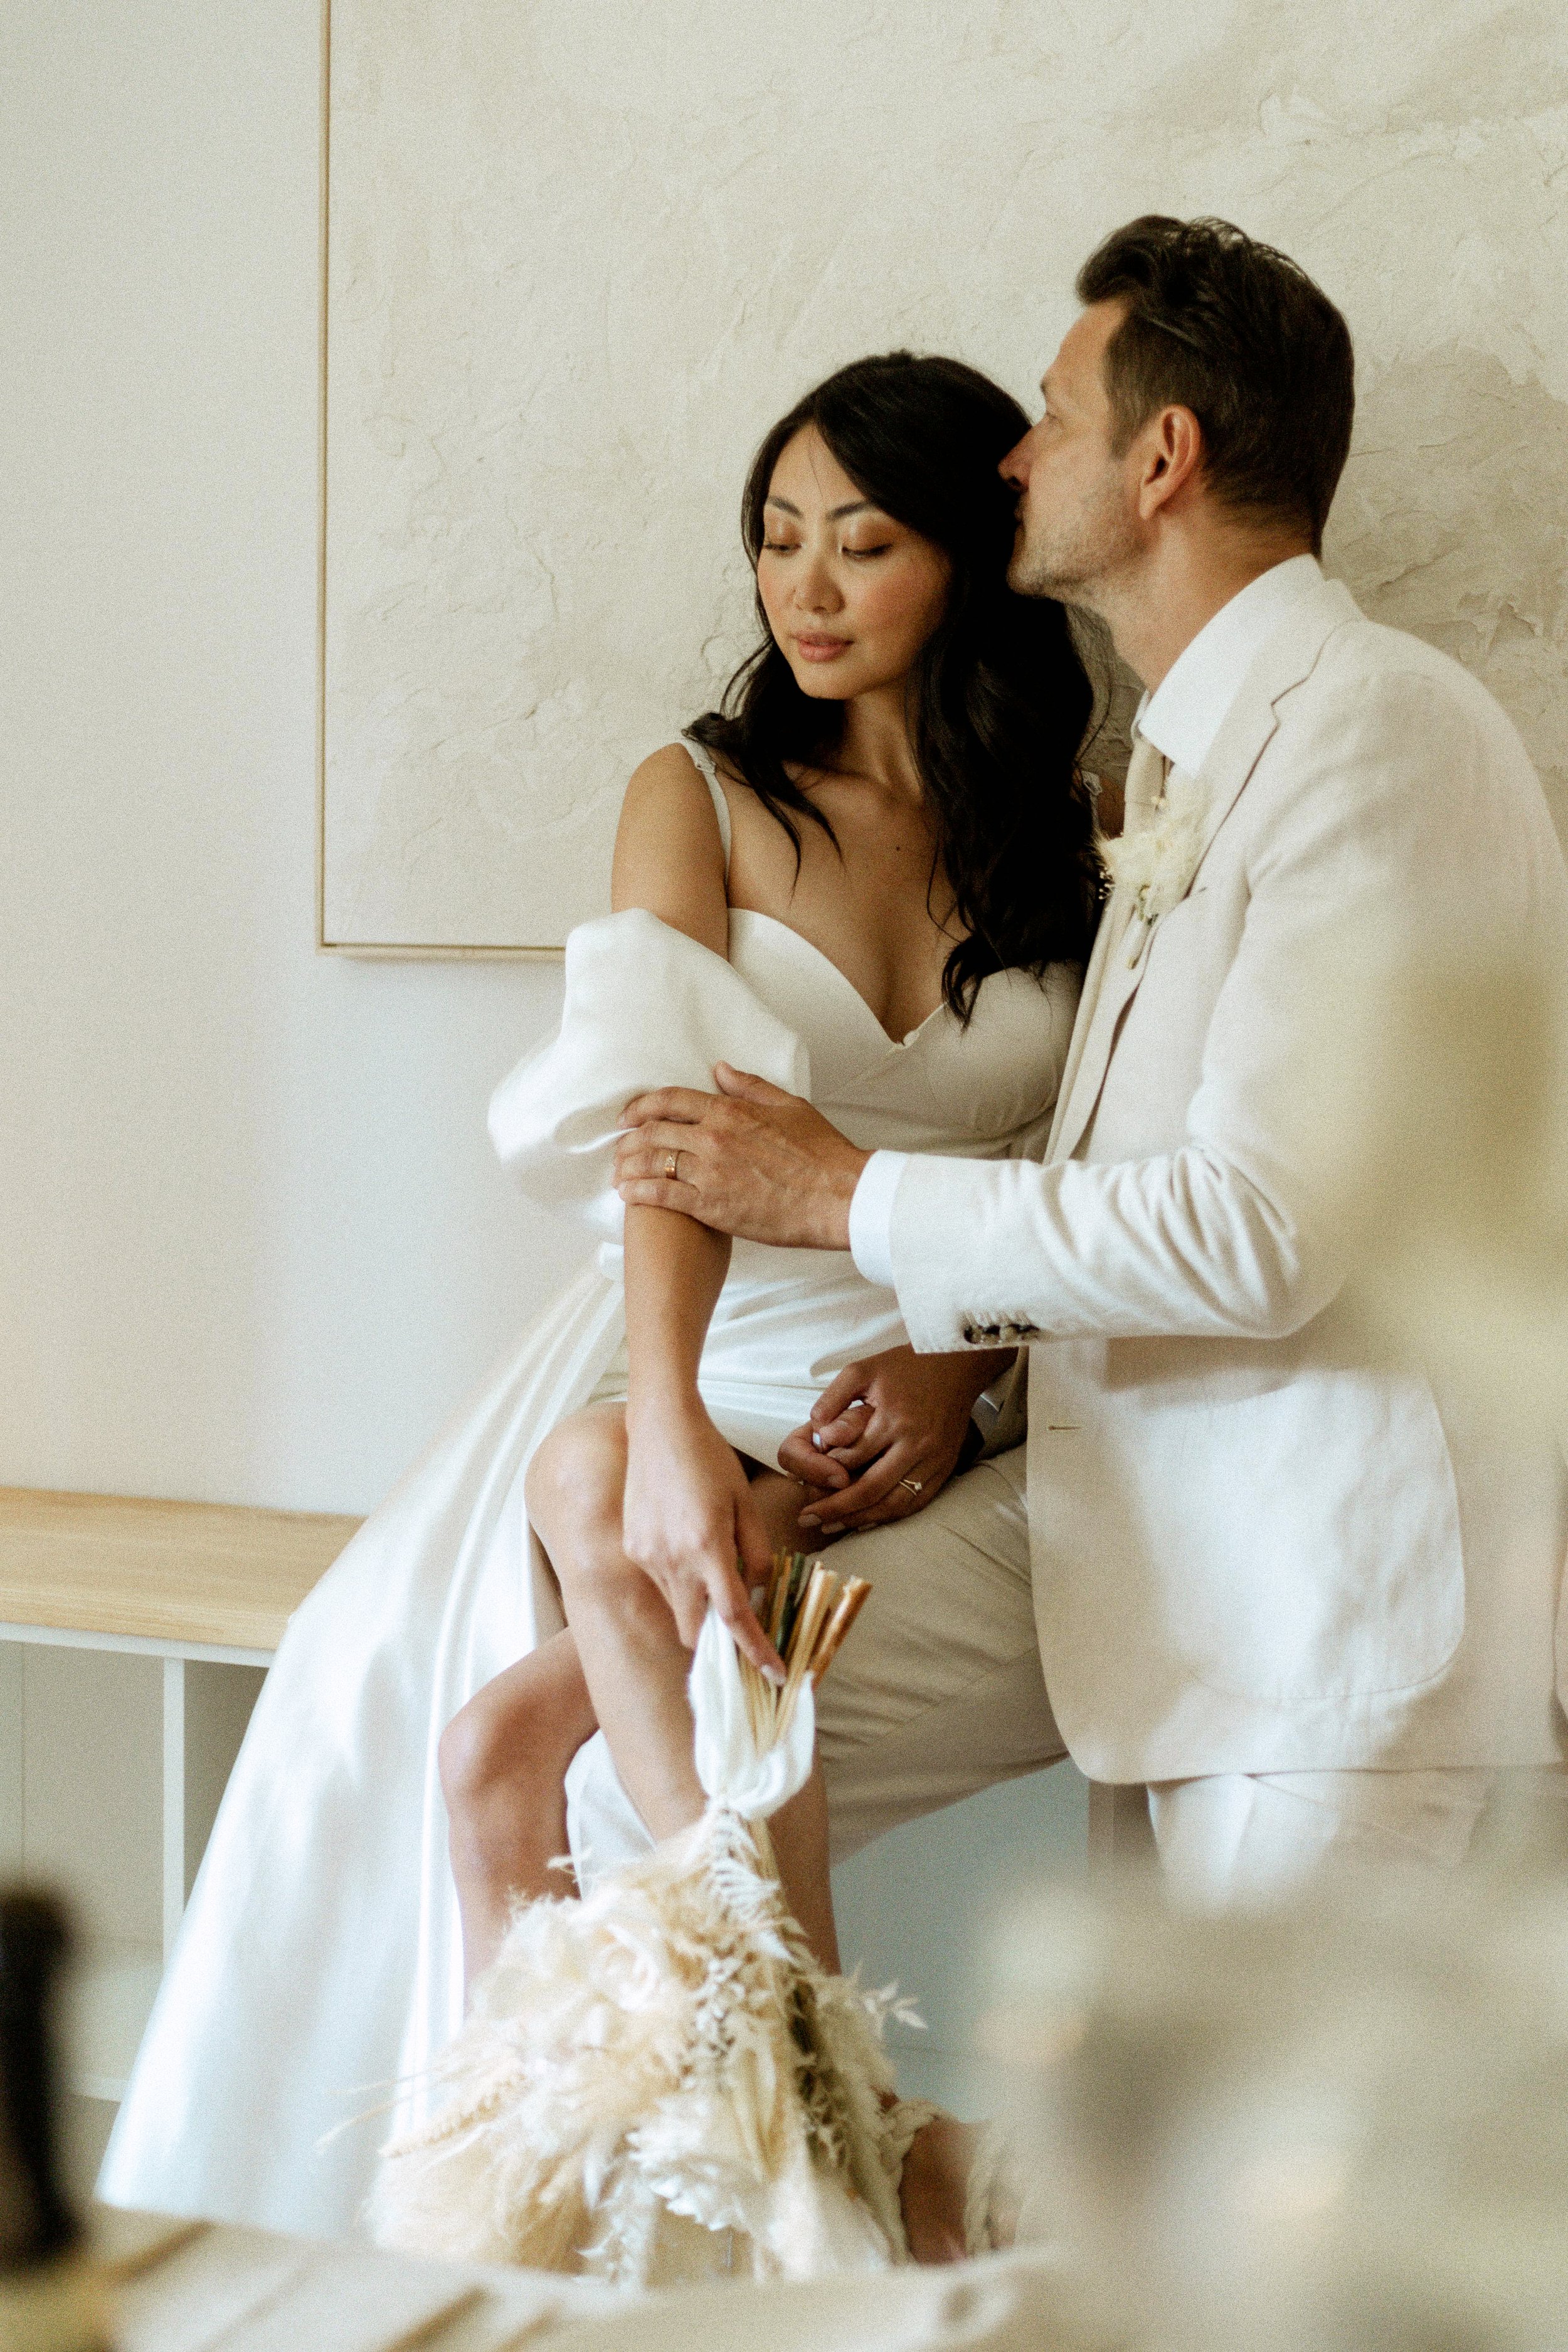 photo of bride and groom kissing while sitting on credenza while celebrating their elopement together - wedding photographer in Toronto